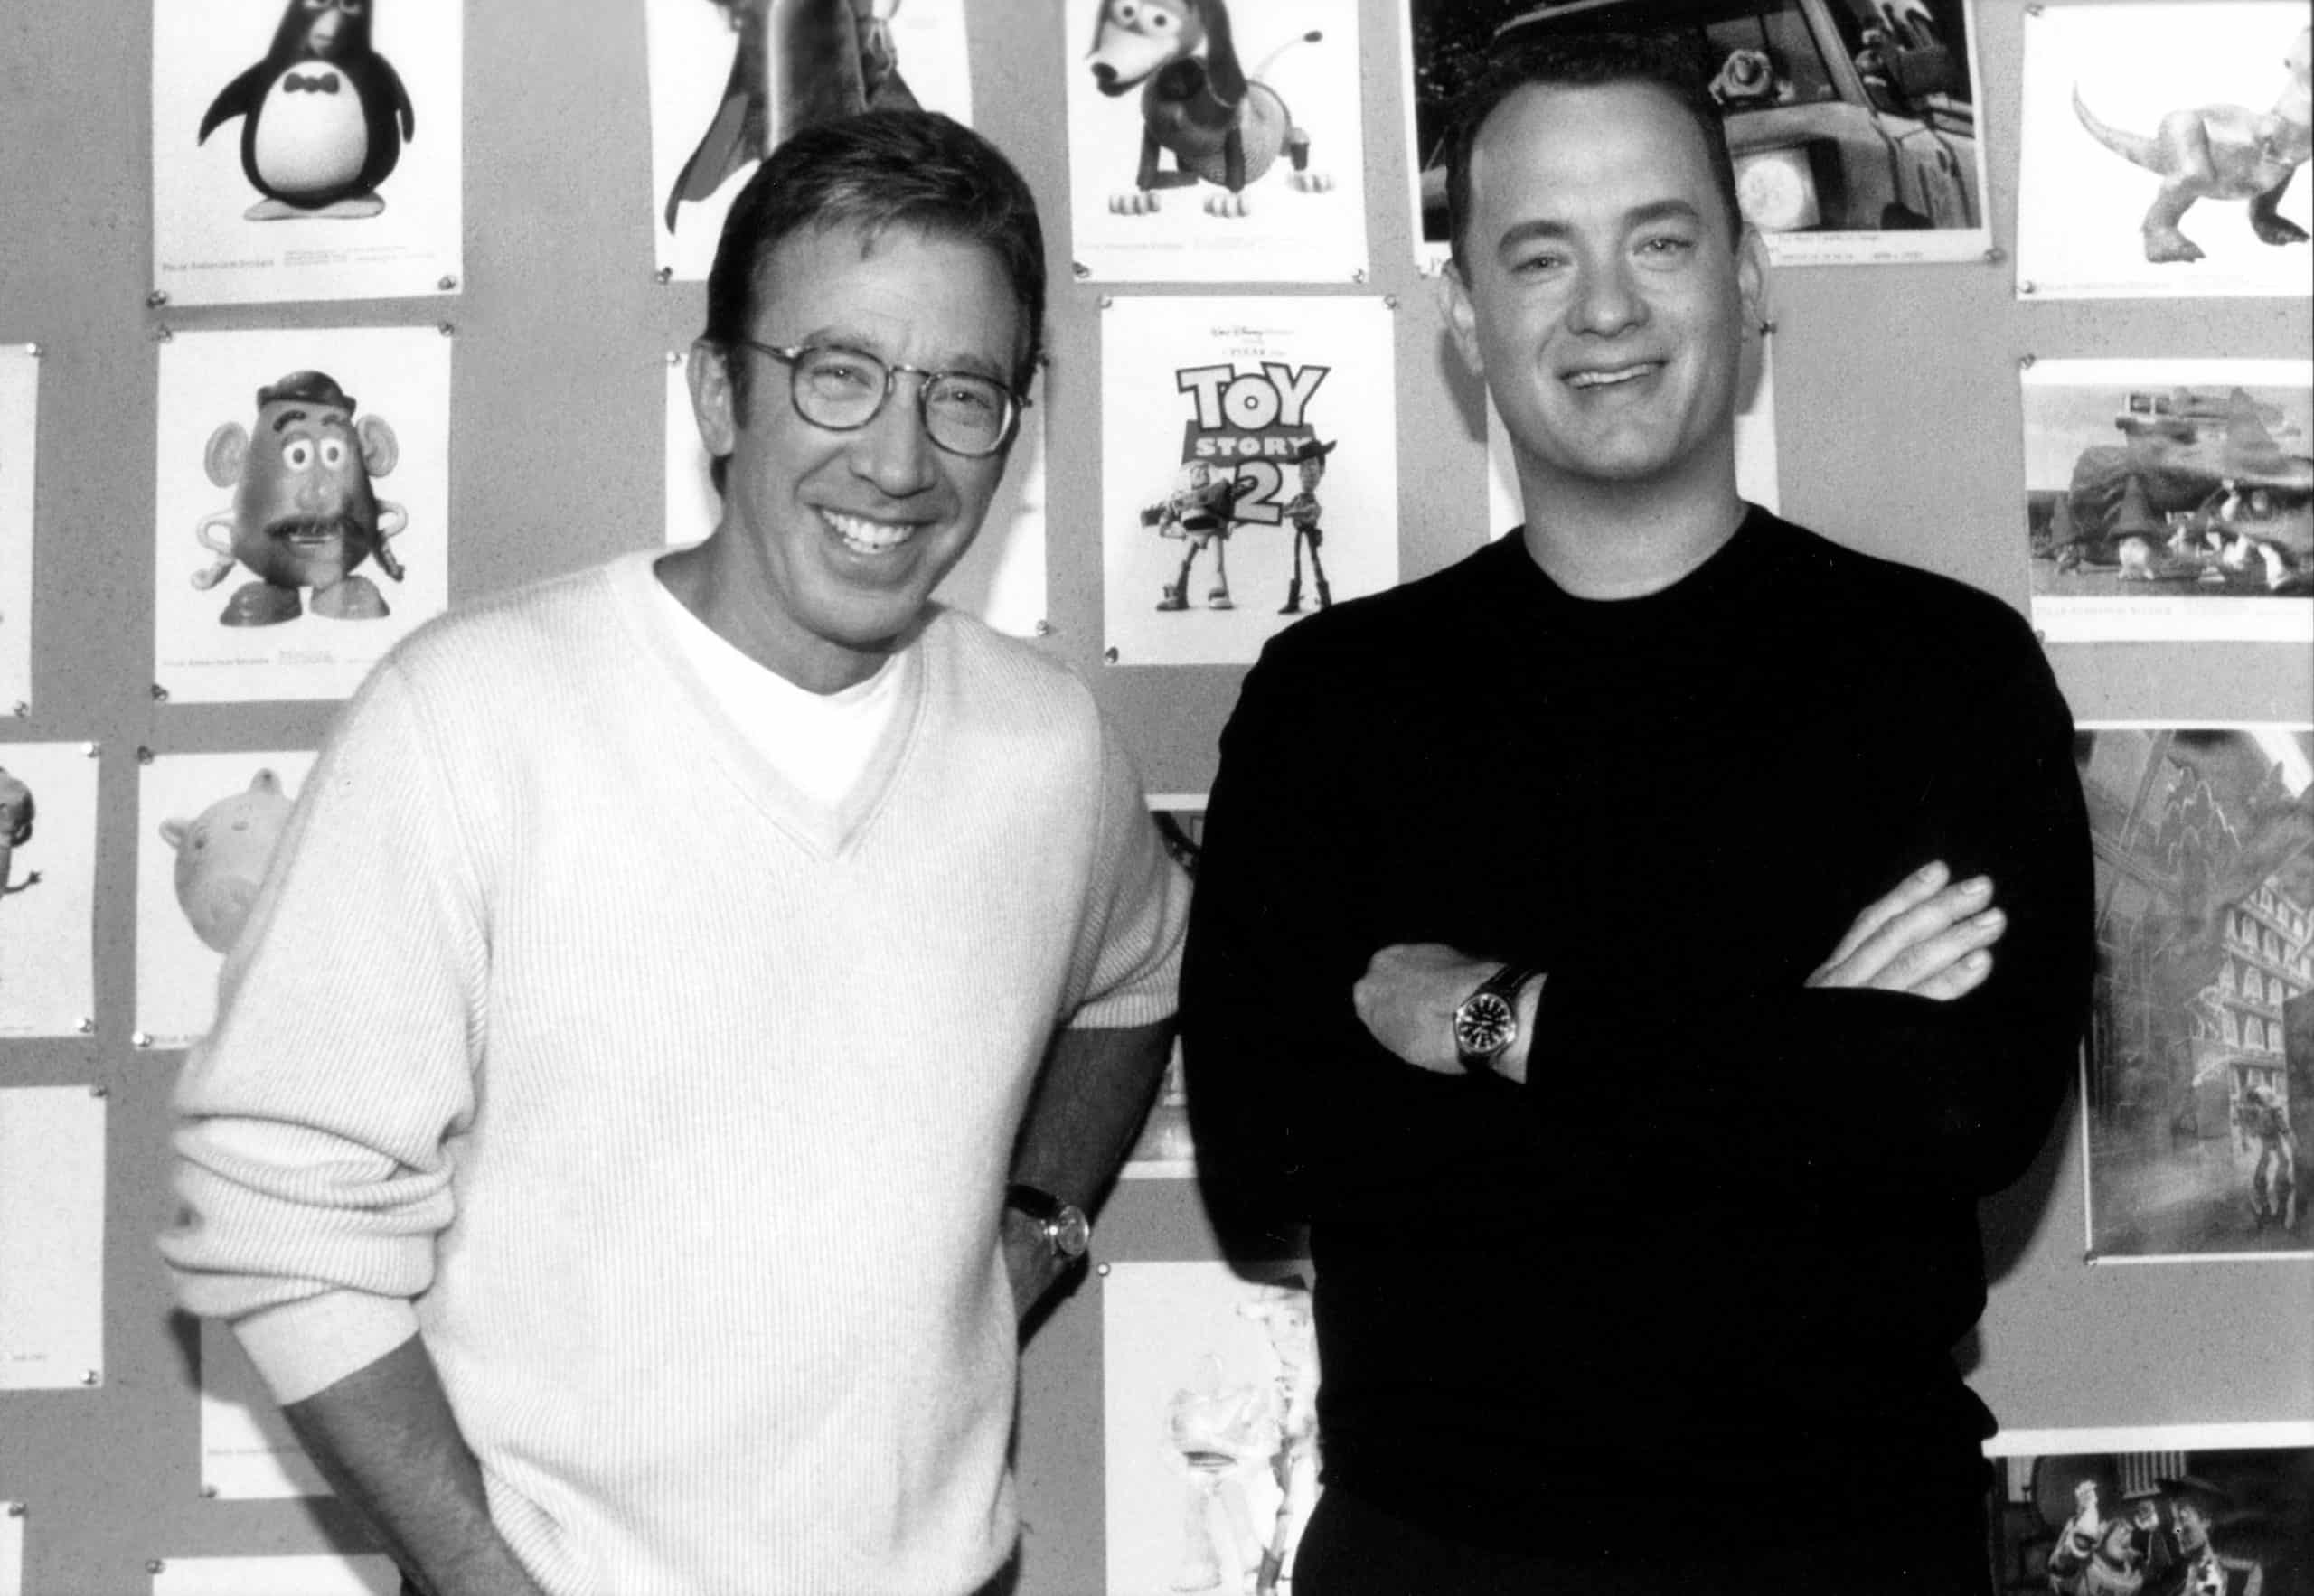 TOY STORY 2, from left: Tim Allen (voice of Buzz Lightyear), Tom Hanks (voice of Woody), 1999